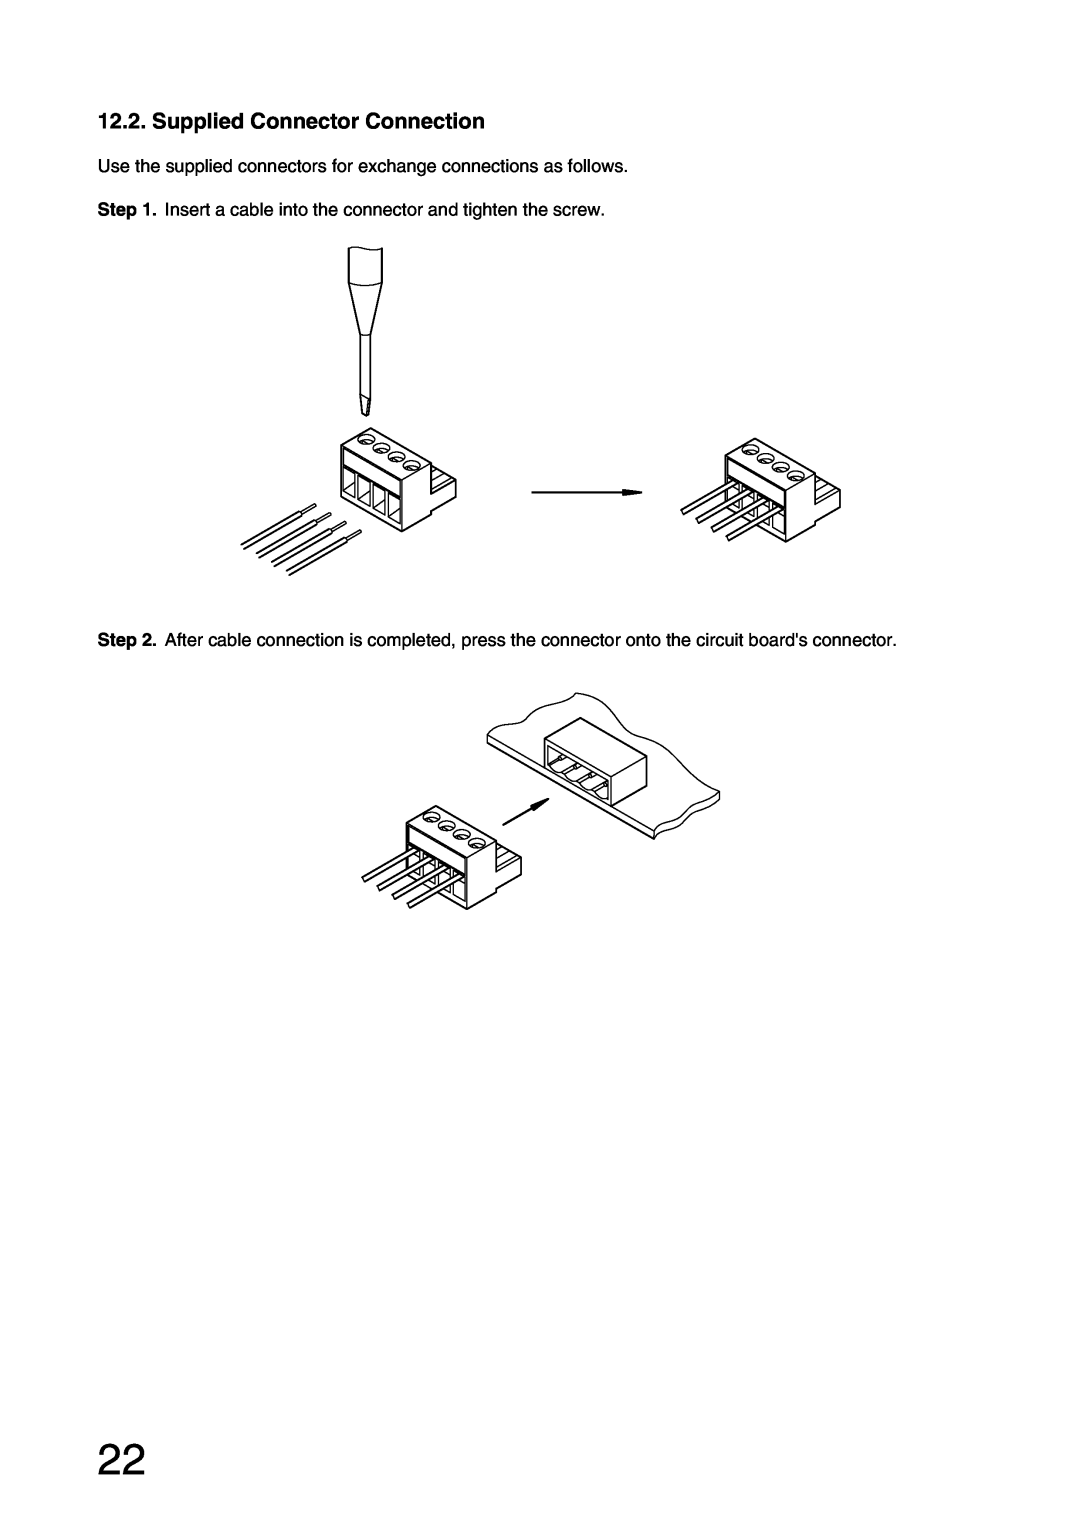 Aiphone AI-900 installation manual Supplied Connector Connection 